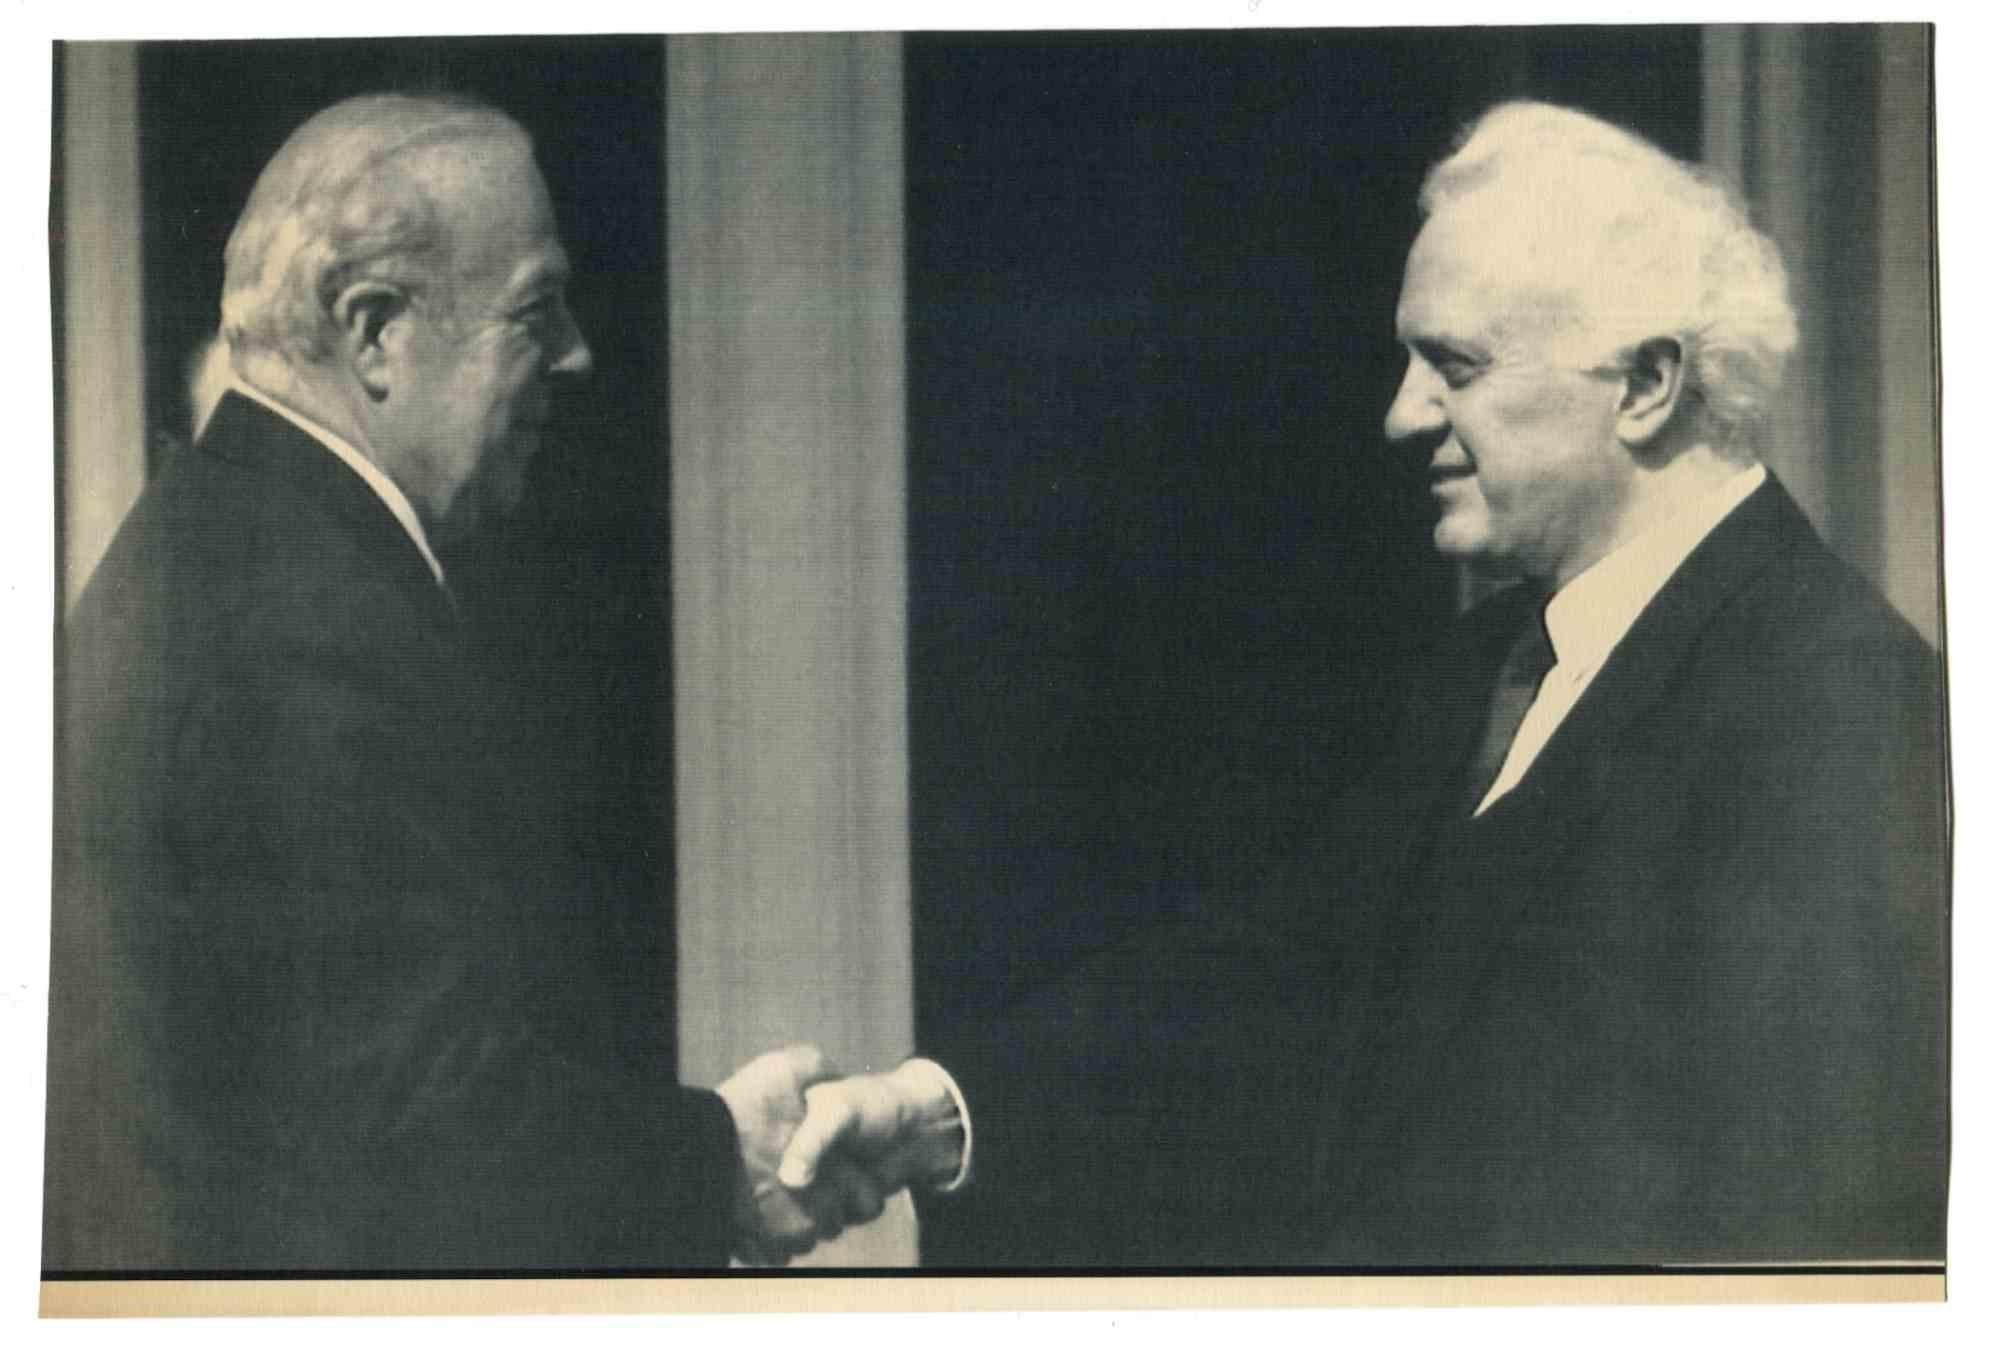 Unknown Figurative Photograph - Eduard Shevardnadze and George Shultz - Vintage Photo - 1980s